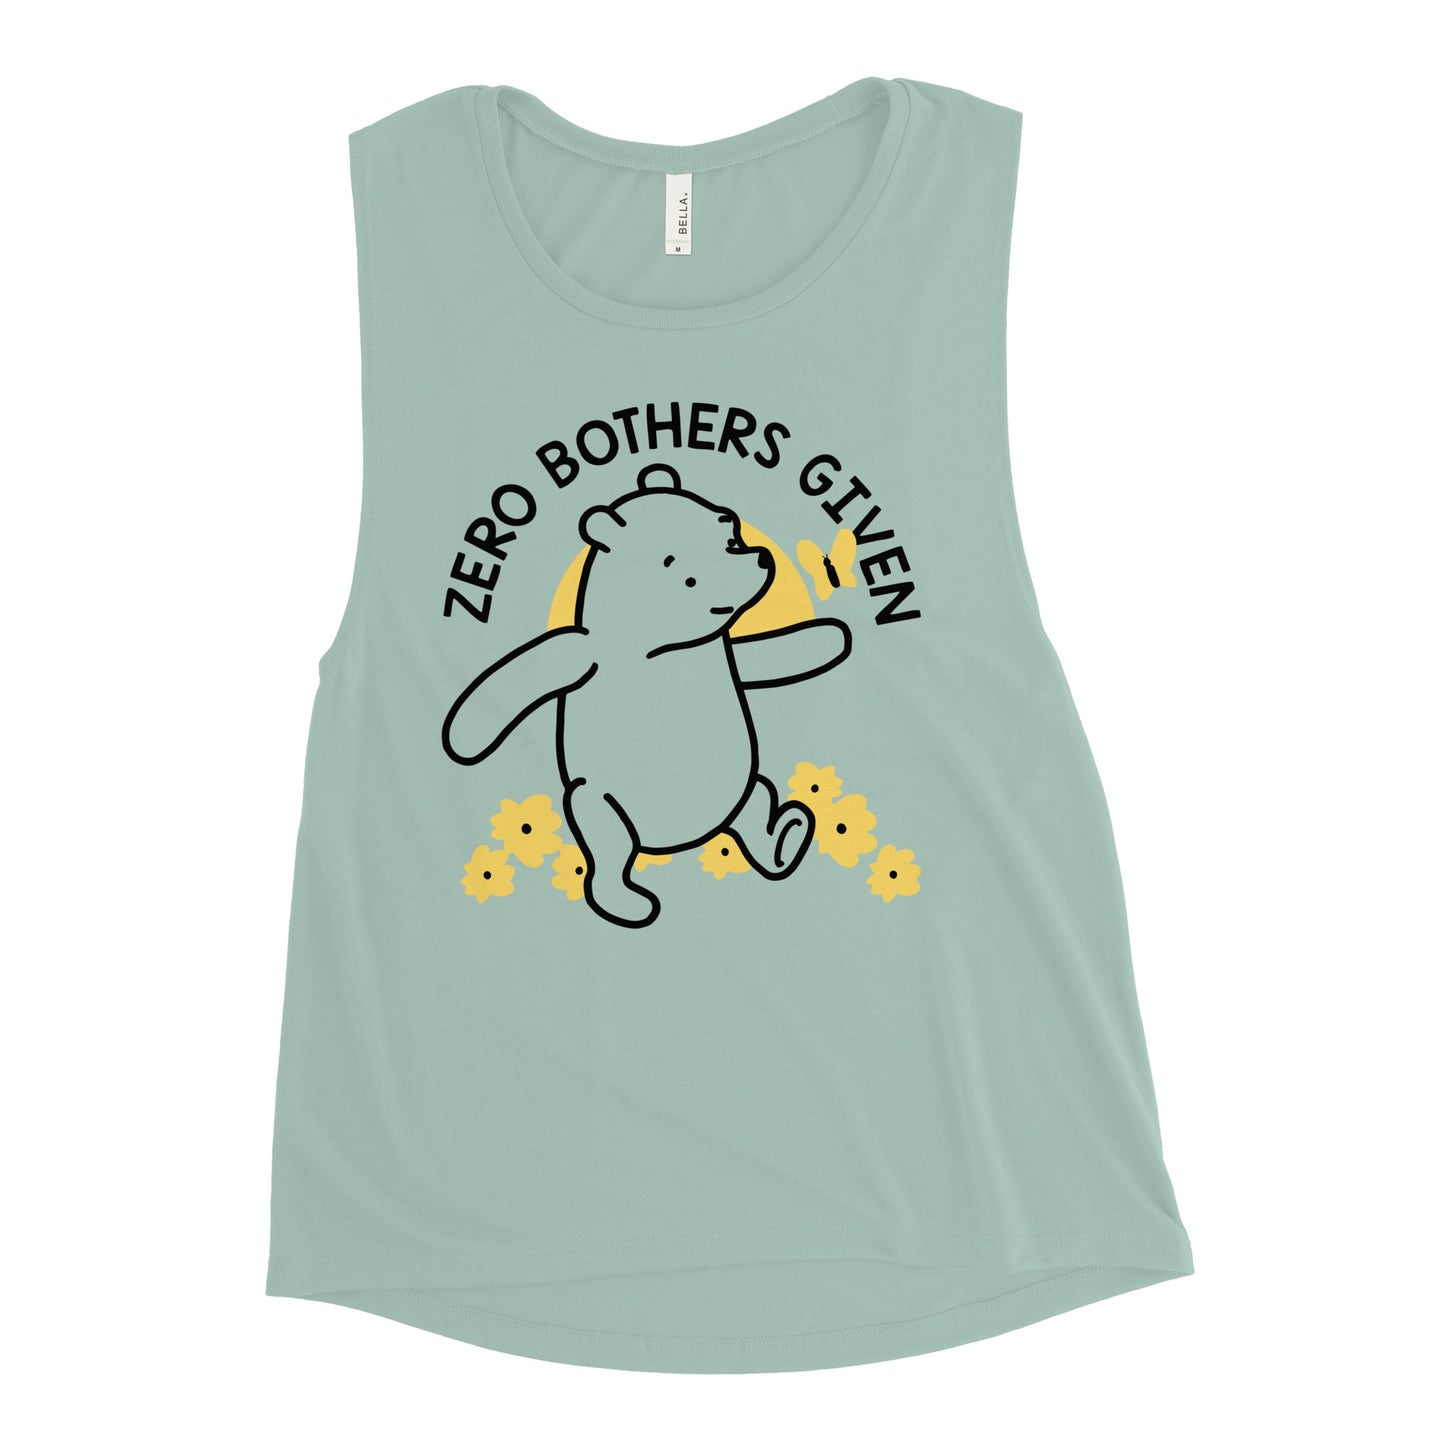 Zero Bothers Given Women's Muscle Tank